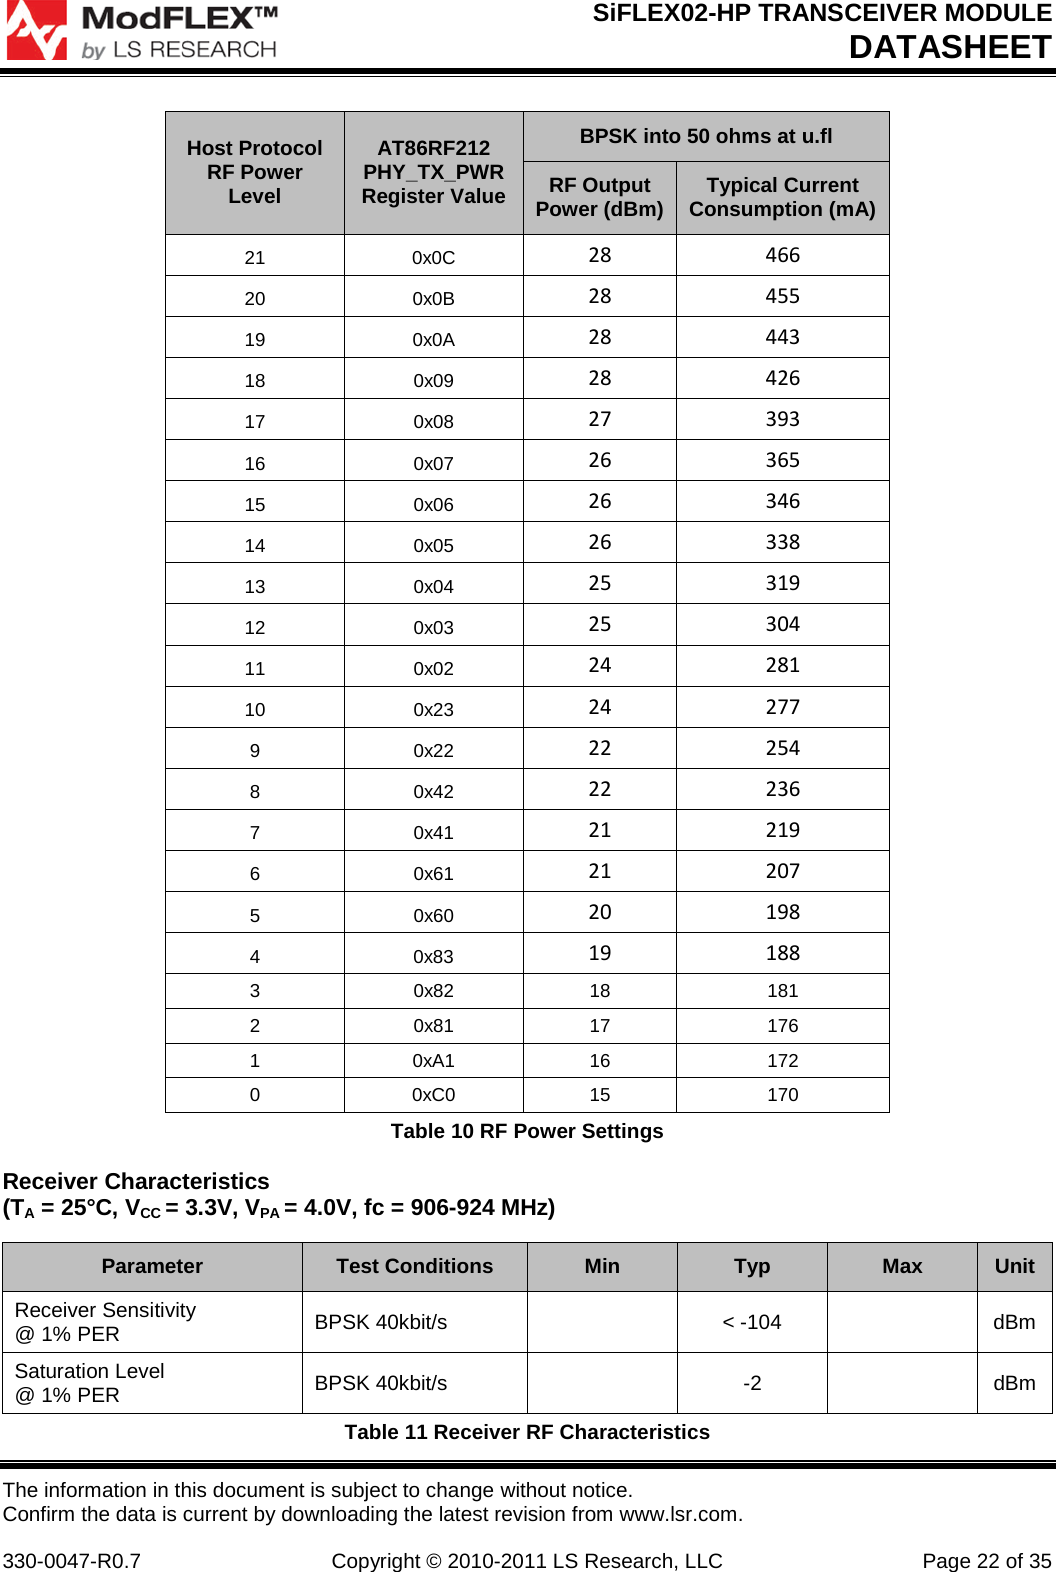 SiFLEX02-HP TRANSCEIVER MODULE DATASHEET The information in this document is subject to change without notice. Confirm the data is current by downloading the latest revision from www.lsr.com.  330-0047-R0.7  Copyright © 2010-2011 LS Research, LLC Page 22 of 35 Host Protocol RF Power Level AT86RF212 PHY_TX_PWR Register Value BPSK into 50 ohms at u.fl RF Output Power (dBm) Typical Current Consumption (mA) 21 0x0C 28 466 20 0x0B 28 455 19 0x0A 28 443 18 0x09 28 426 17 0x08 27 393 16 0x07 26 365 15 0x06 26 346 14 0x05 26 338 13 0x04 25 319 12 0x03 25 304 11 0x02 24 281 10 0x23 24 277 9 0x22 22 254 8 0x42 22 236 7 0x41 21 219 6 0x61 21 207 5 0x60 20 198 4  0x83 19 188 3 0x82 18 181 2 0x81 17 176 1 0xA1 16 172 0 0xC0 15 170 Table 10 RF Power Settings Receiver Characteristics (TA = 25°C, VCC = 3.3V, VPA = 4.0V, fc = 906-924 MHz) Parameter Test Conditions Min Typ Max Unit Receiver Sensitivity @ 1% PER BPSK 40kbit/s    &lt; -104    dBm Saturation Level @ 1% PER BPSK 40kbit/s    -2    dBm Table 11 Receiver RF Characteristics 